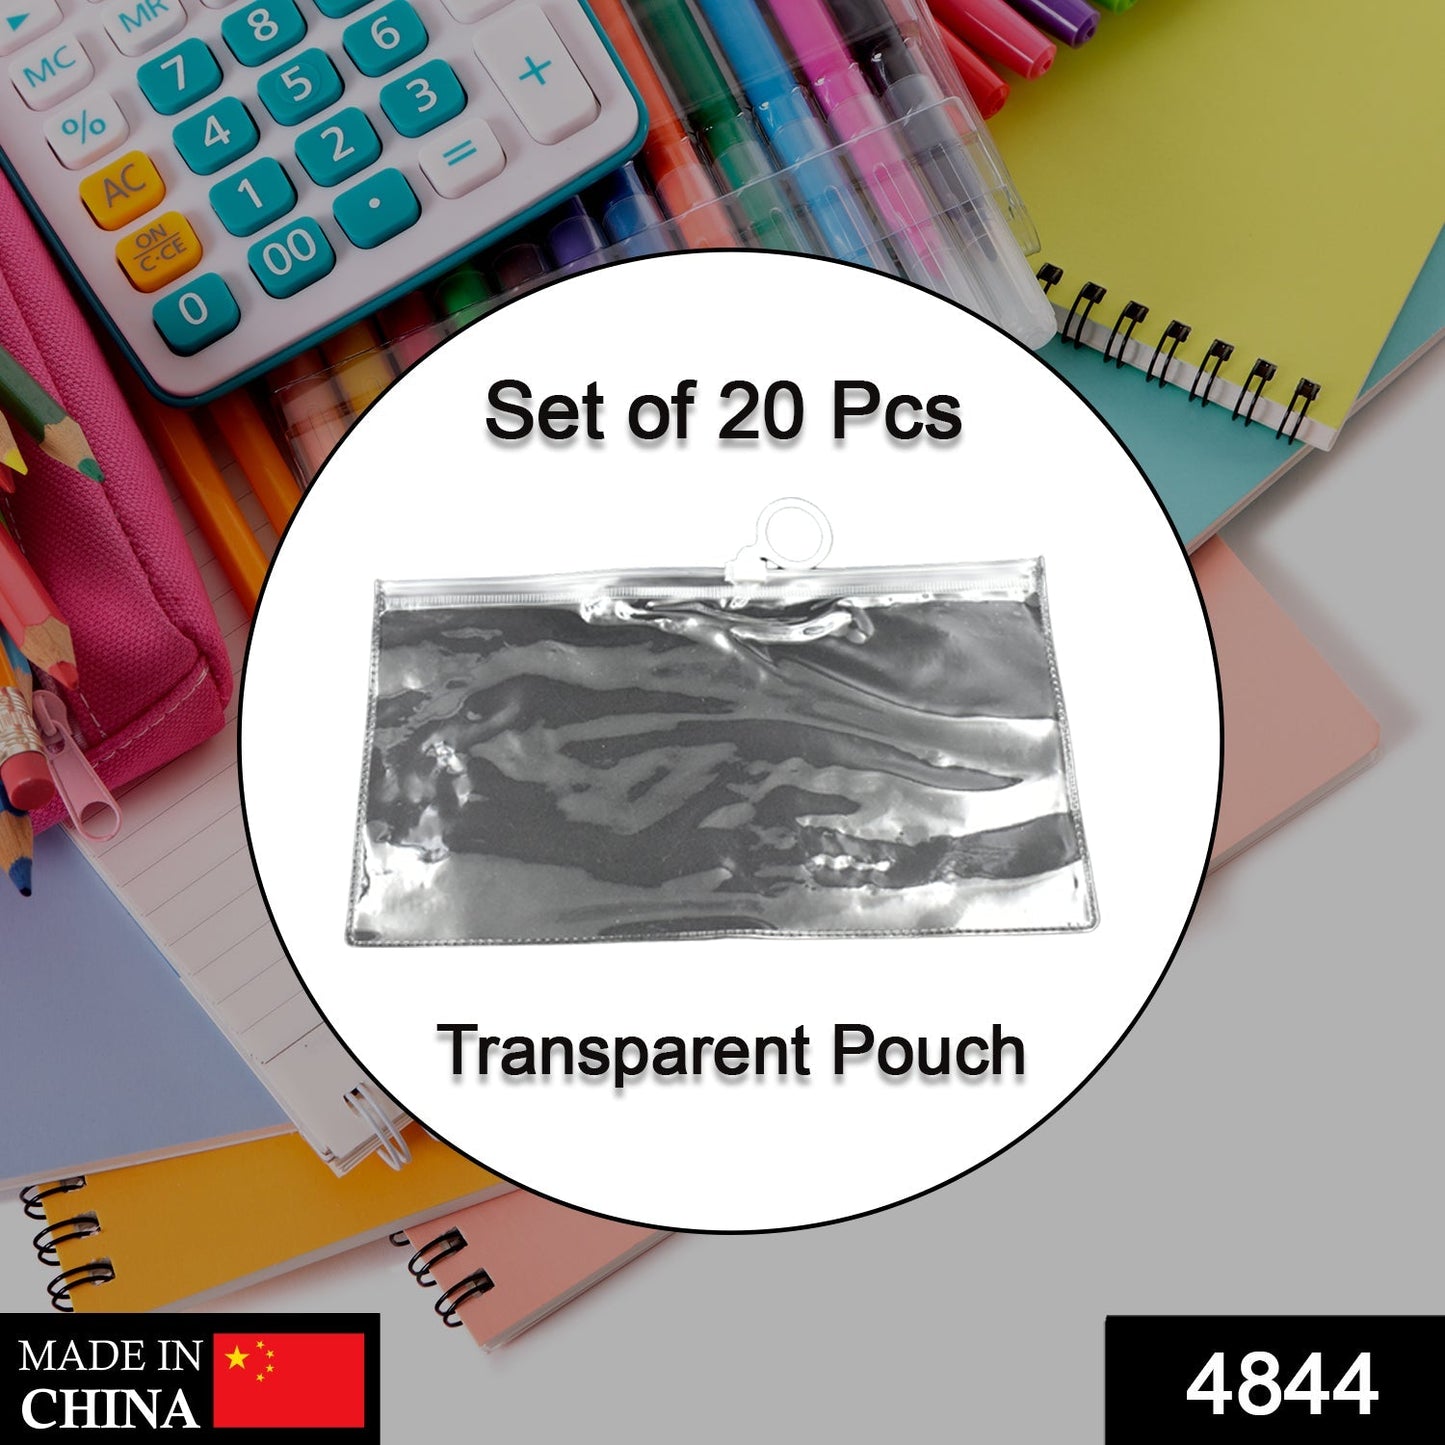 4844 20 Pc Transparent Pouch For Carrying Stationary Stuffs And All By The Students.